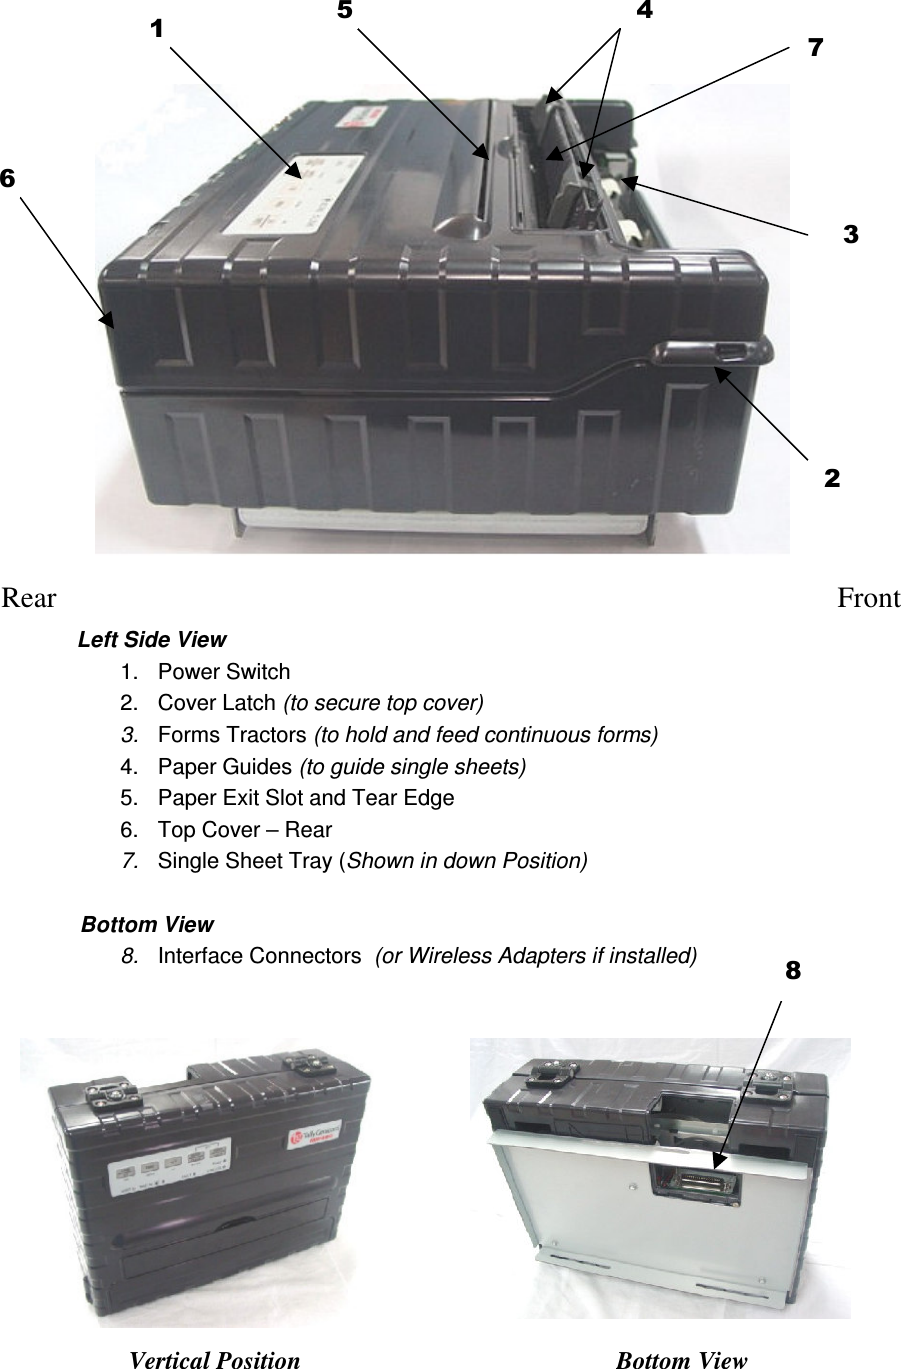                     Rear    Front Left Side View 1.  Power Switch 2.  Cover Latch (to secure top cover) 3.  Forms Tractors (to hold and feed continuous forms) 4.  Paper Guides (to guide single sheets) 5.  Paper Exit Slot and Tear Edge 6.  Top Cover – Rear 7.  Single Sheet Tray (Shown in down Position)               Bottom View 8.  Interface Connectors  (or Wireless Adapters if installed)           Vertical Position Bottom View 